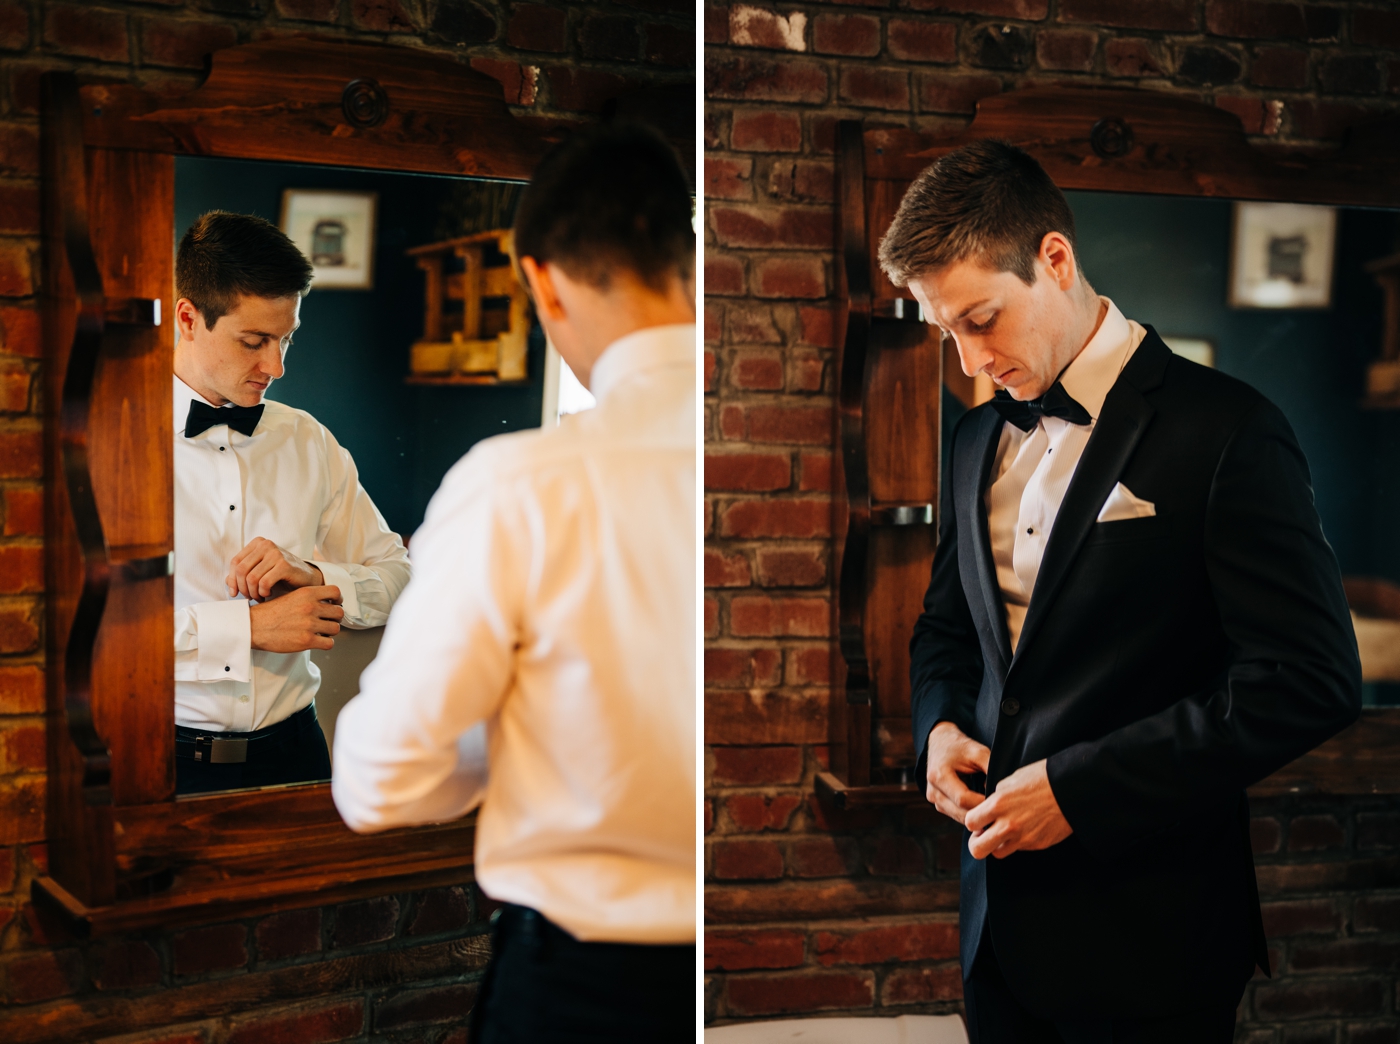 Groom getting ready for wedding in Pittsburg, PA